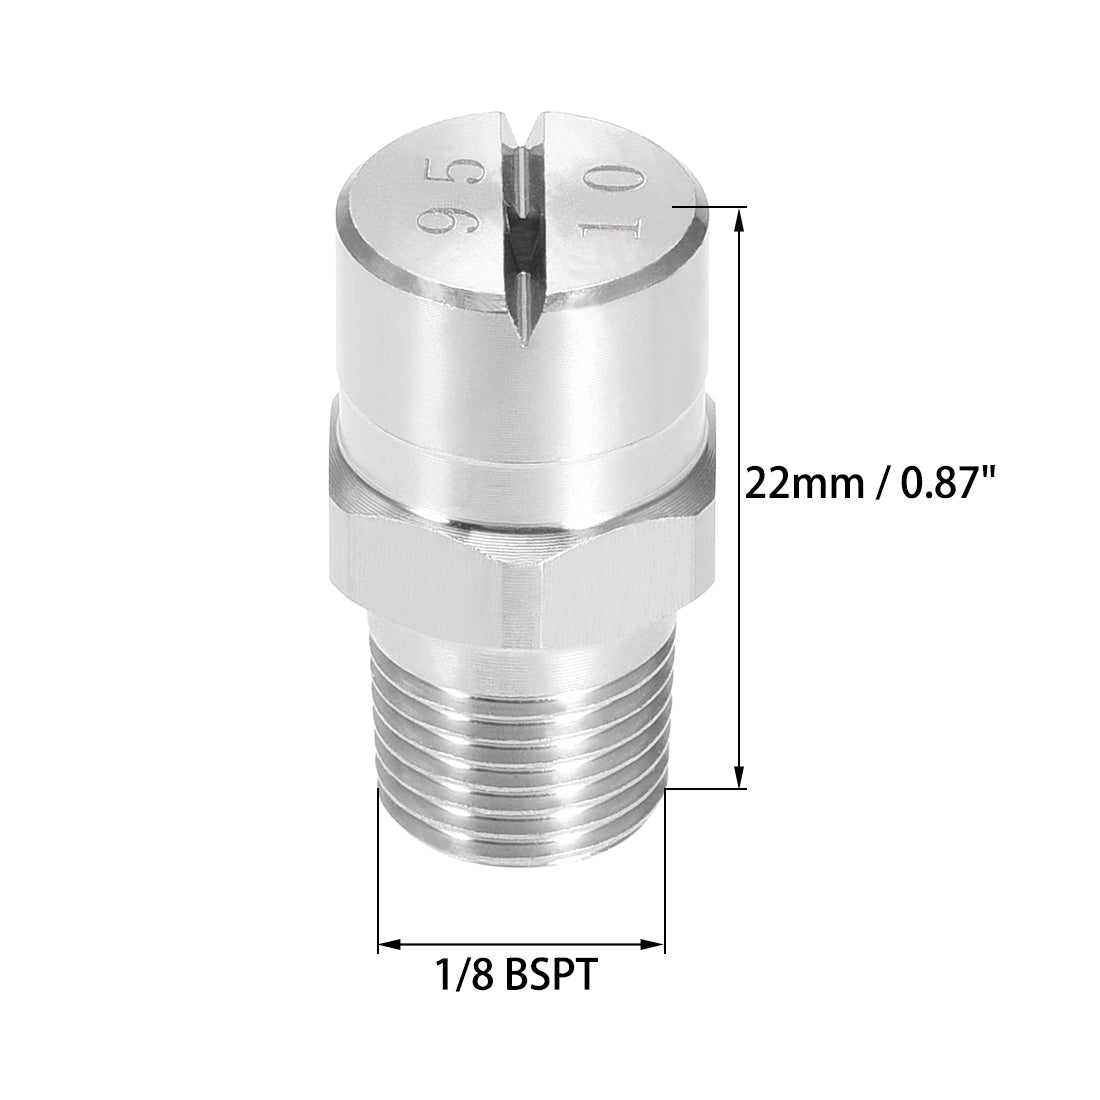 Uxcell Uxcell Flat Fan Spray Tip - 1/8BSPT Male Thread 304 Stainless Steel Nozzle - 95 Degree 1.1mm Orifice Diameter - 2 Pcs